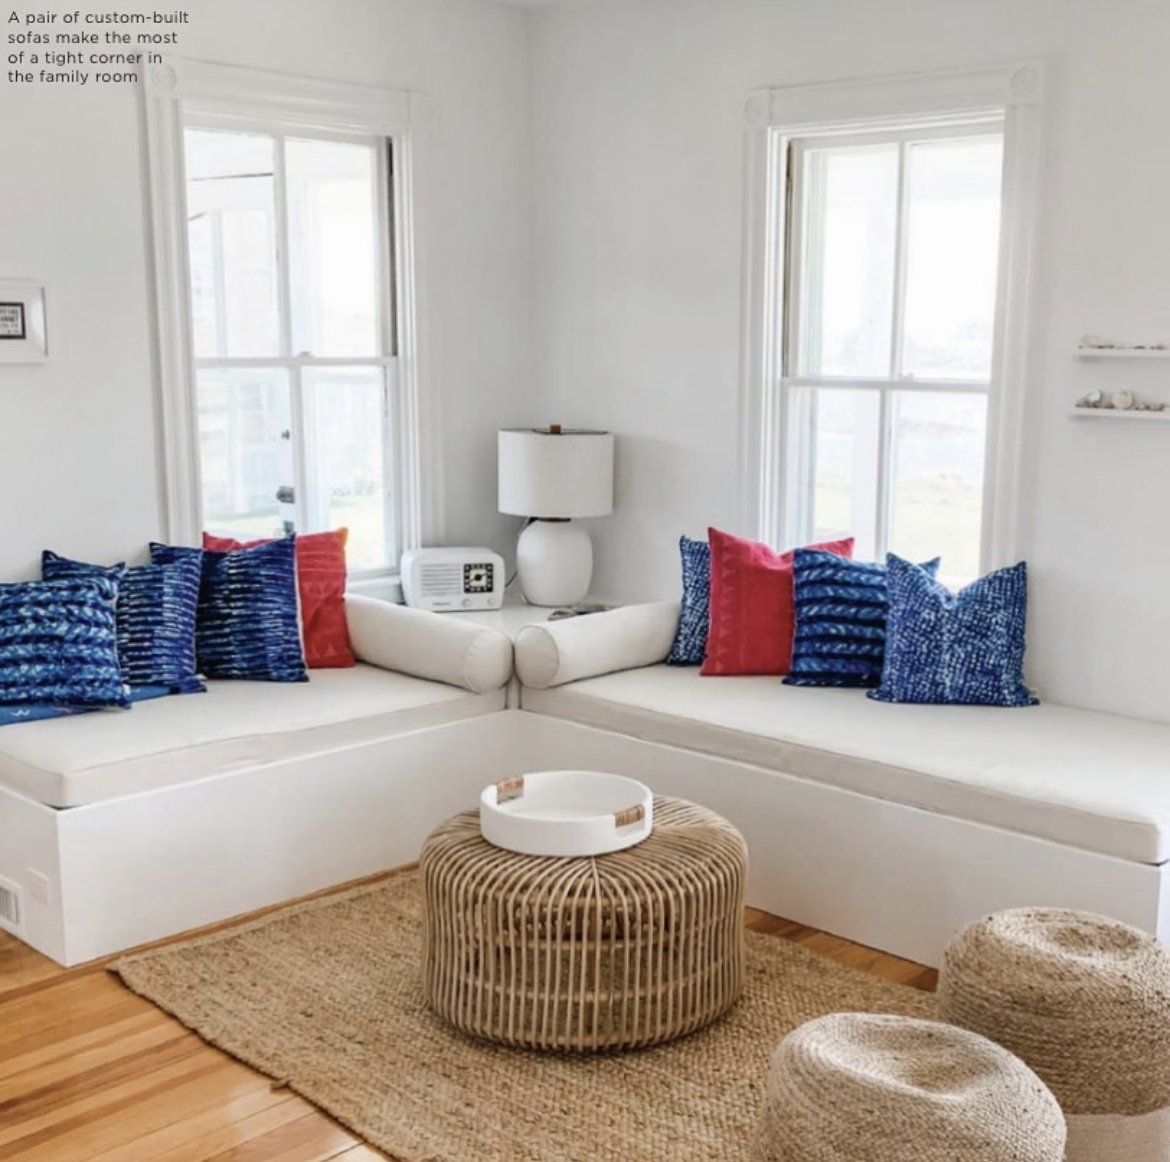 Our blue batik pillows add vibrance to a client's beautiful beach home featured in @thebaymag. #homedecor #homedecorideas #homeaesthetic #patterndesign #sustainabledesign #handmade #homesweethome #myhomestyle #artisanmade #slowmade #designwithpurpose #ethicallymade #ethicallysou